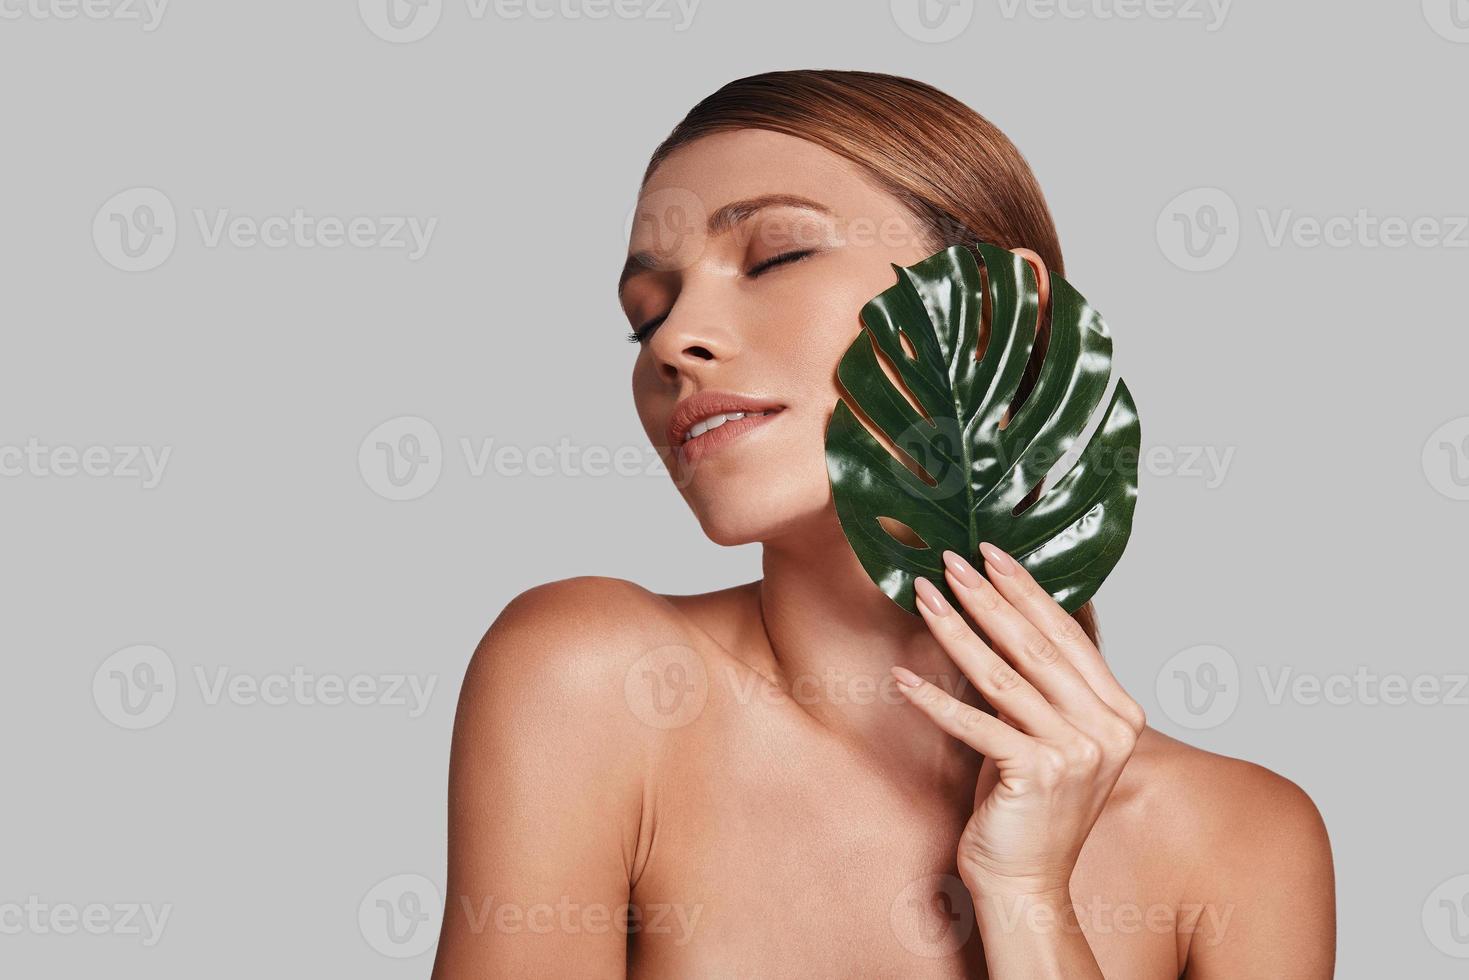 Impossible to resist her beauty. Attractive young woman keeping eyes closed and covering with leaf while standing against grey background photo